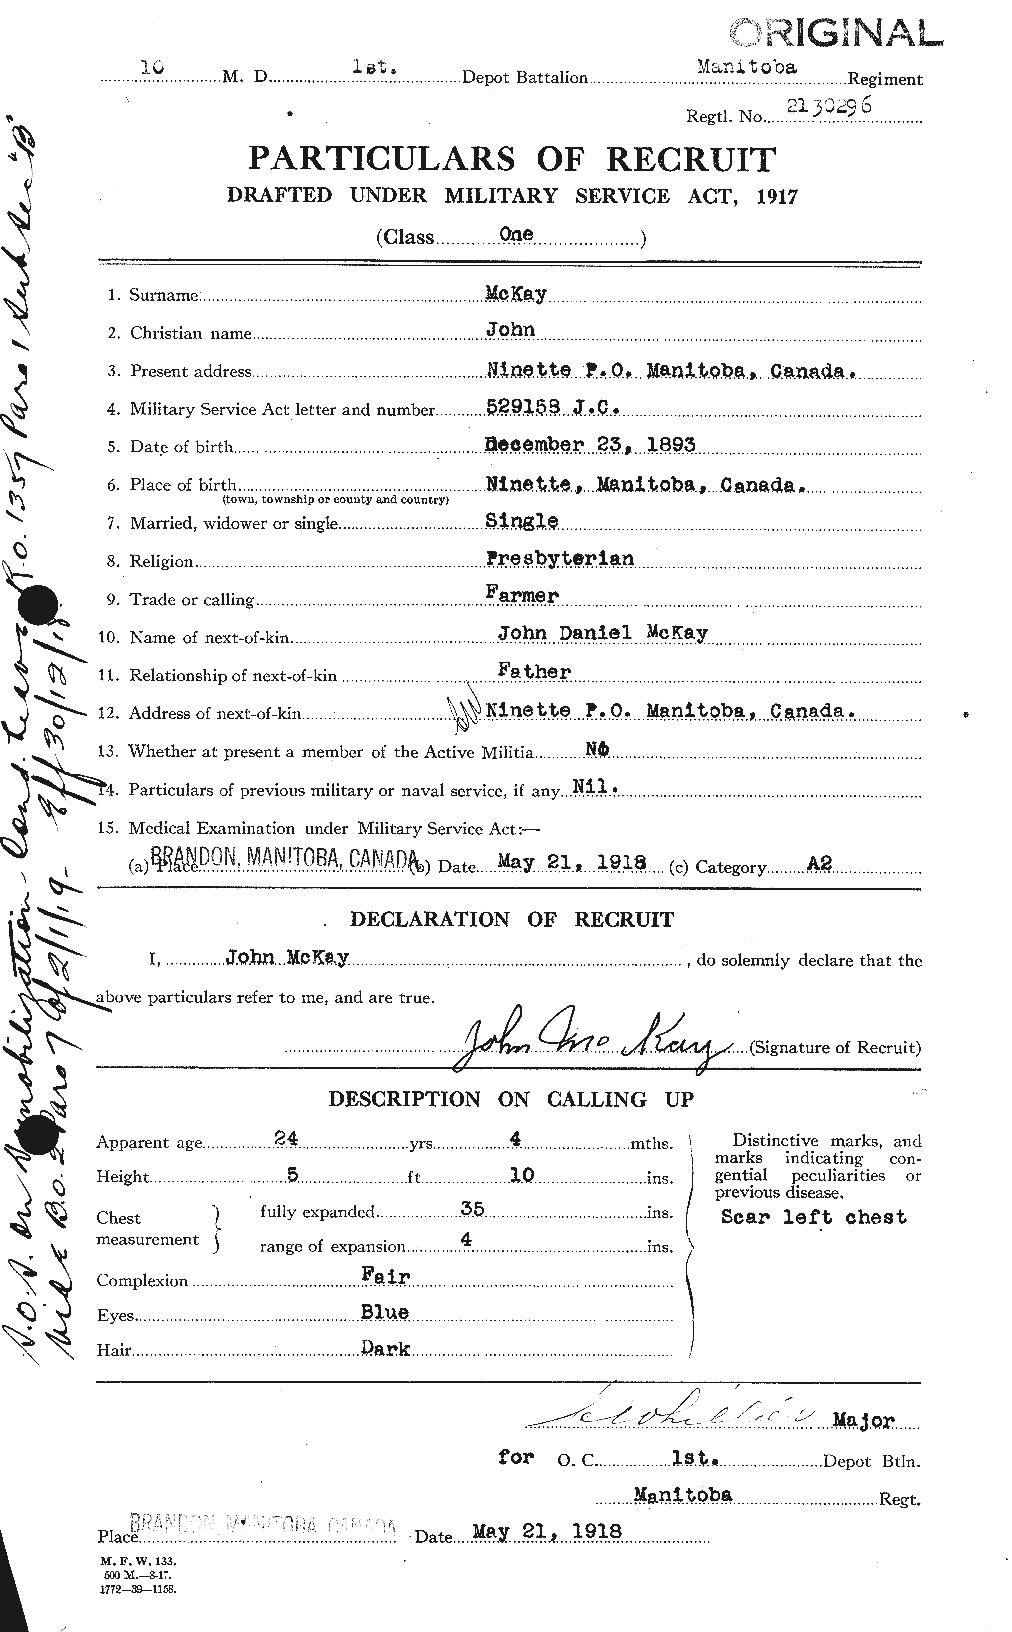 Personnel Records of the First World War - CEF 526994a